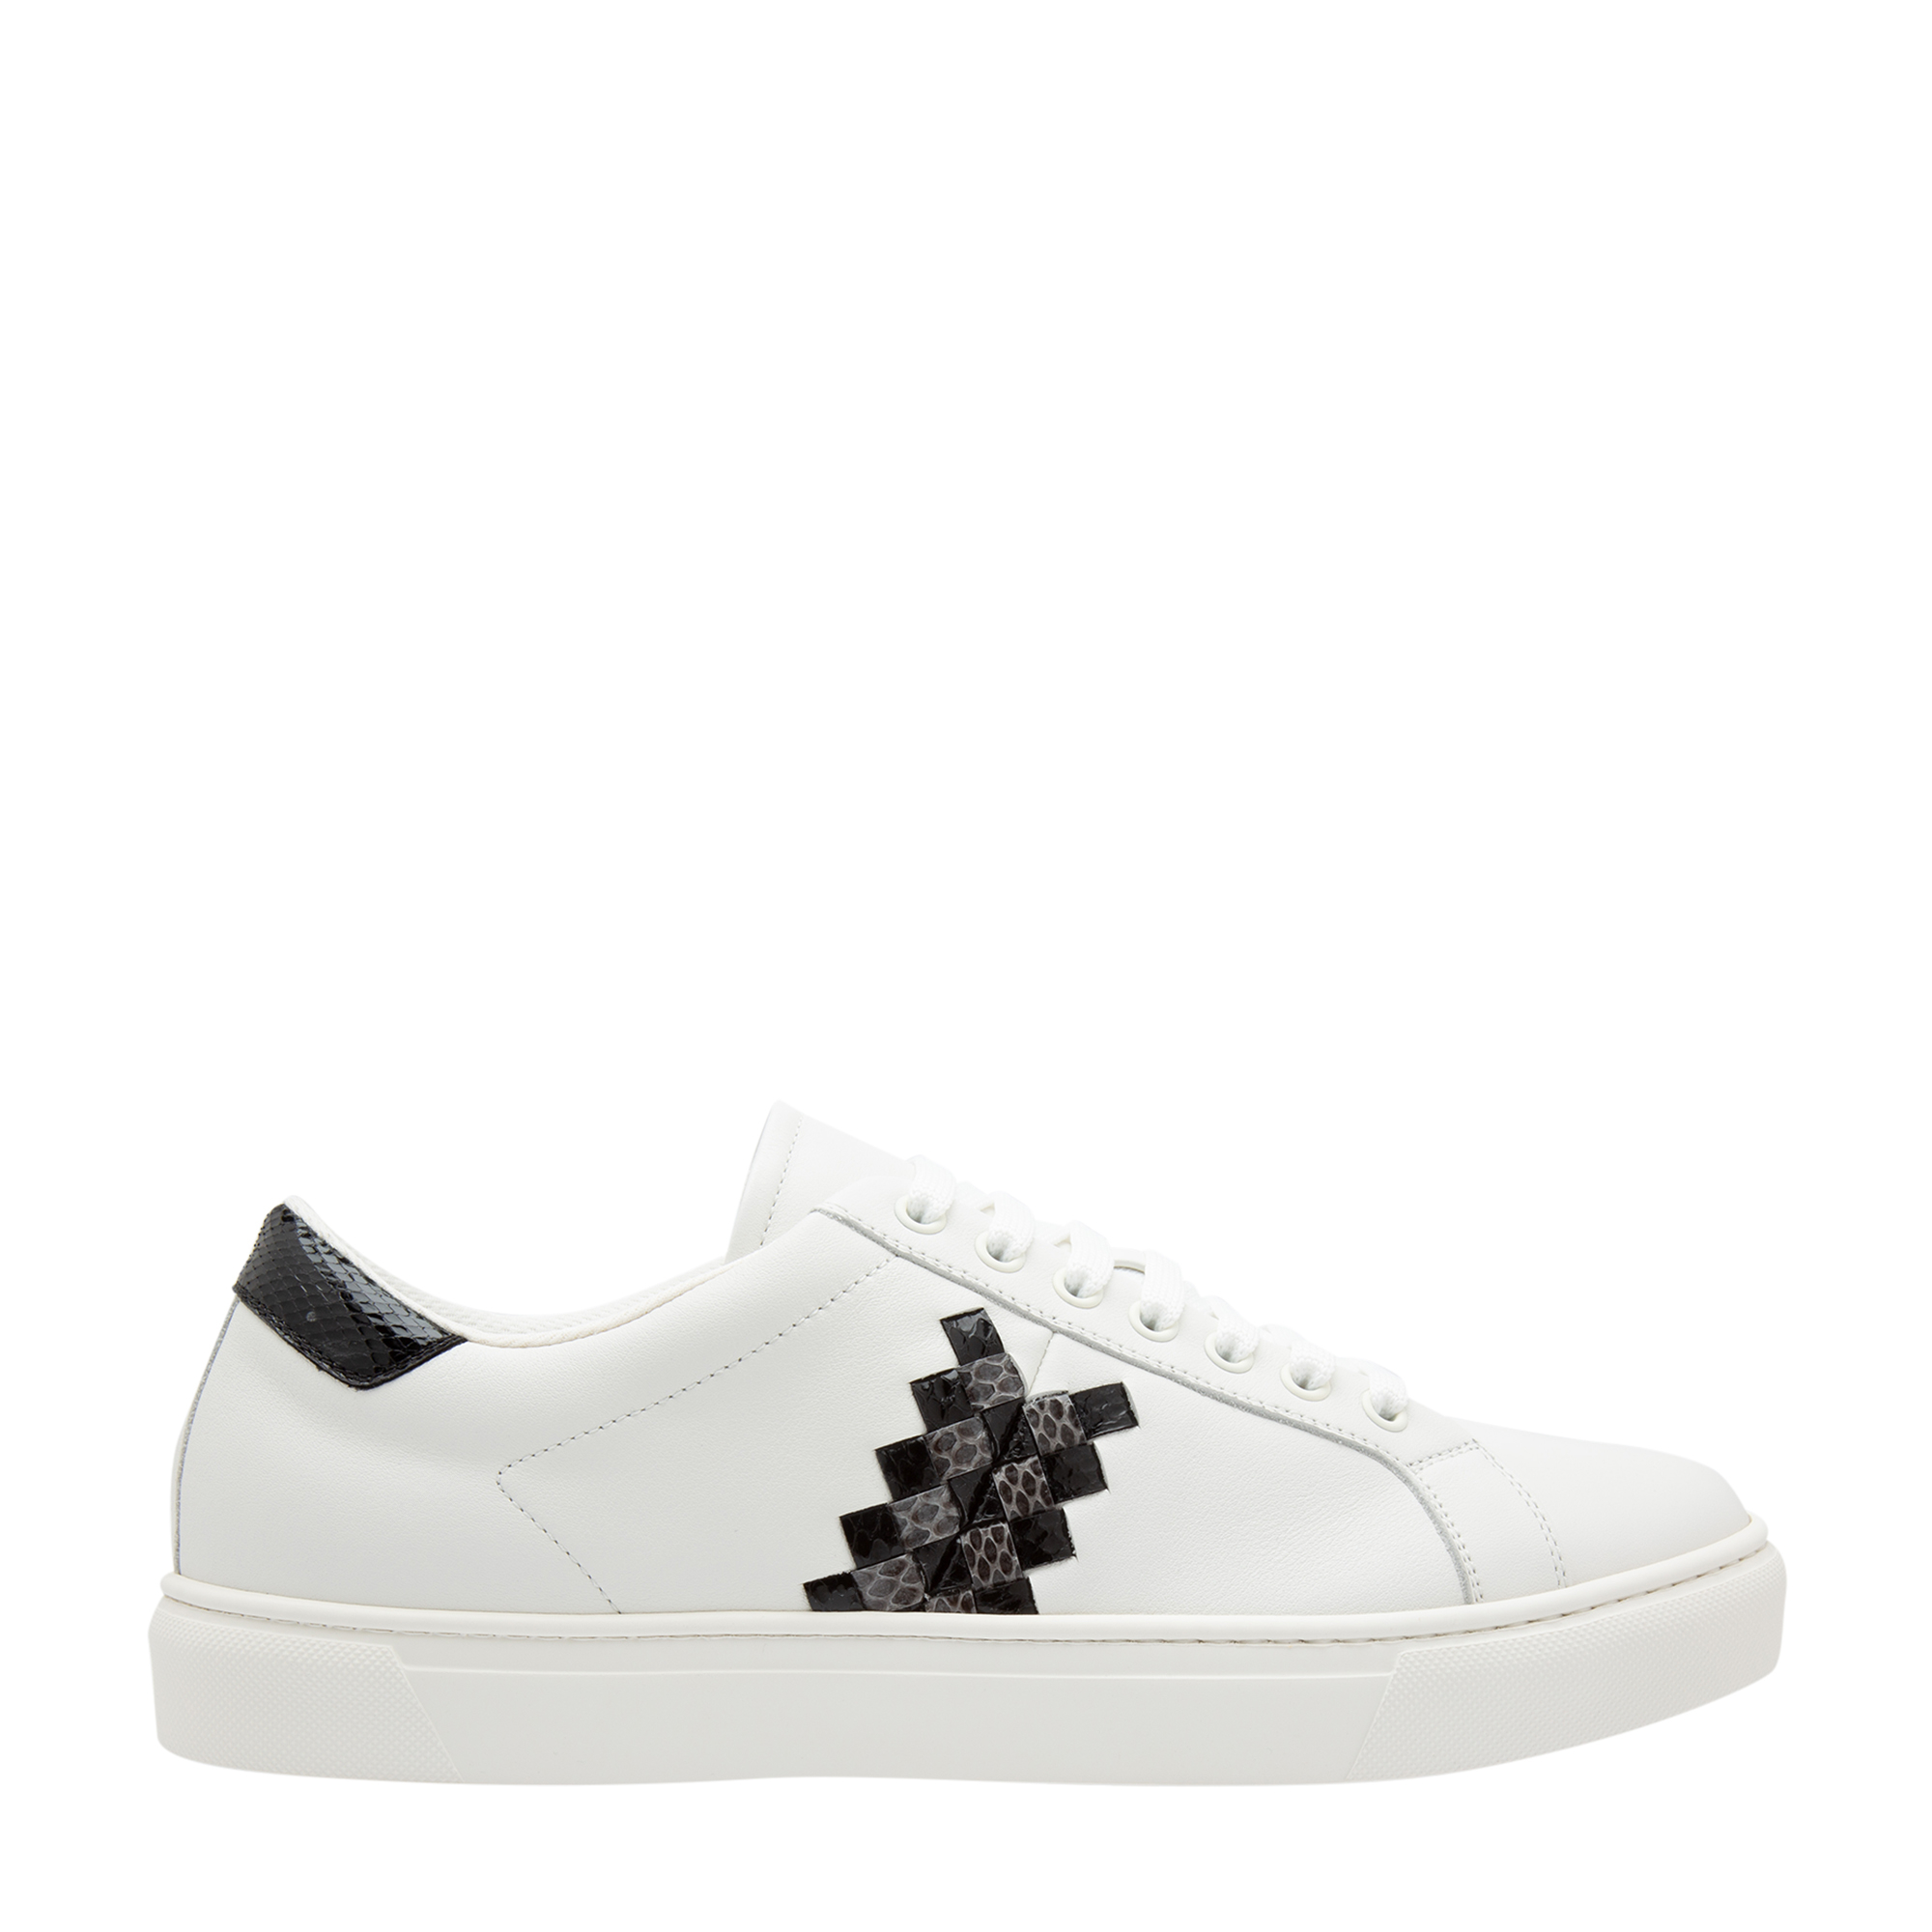 BV Checker leather sneakers